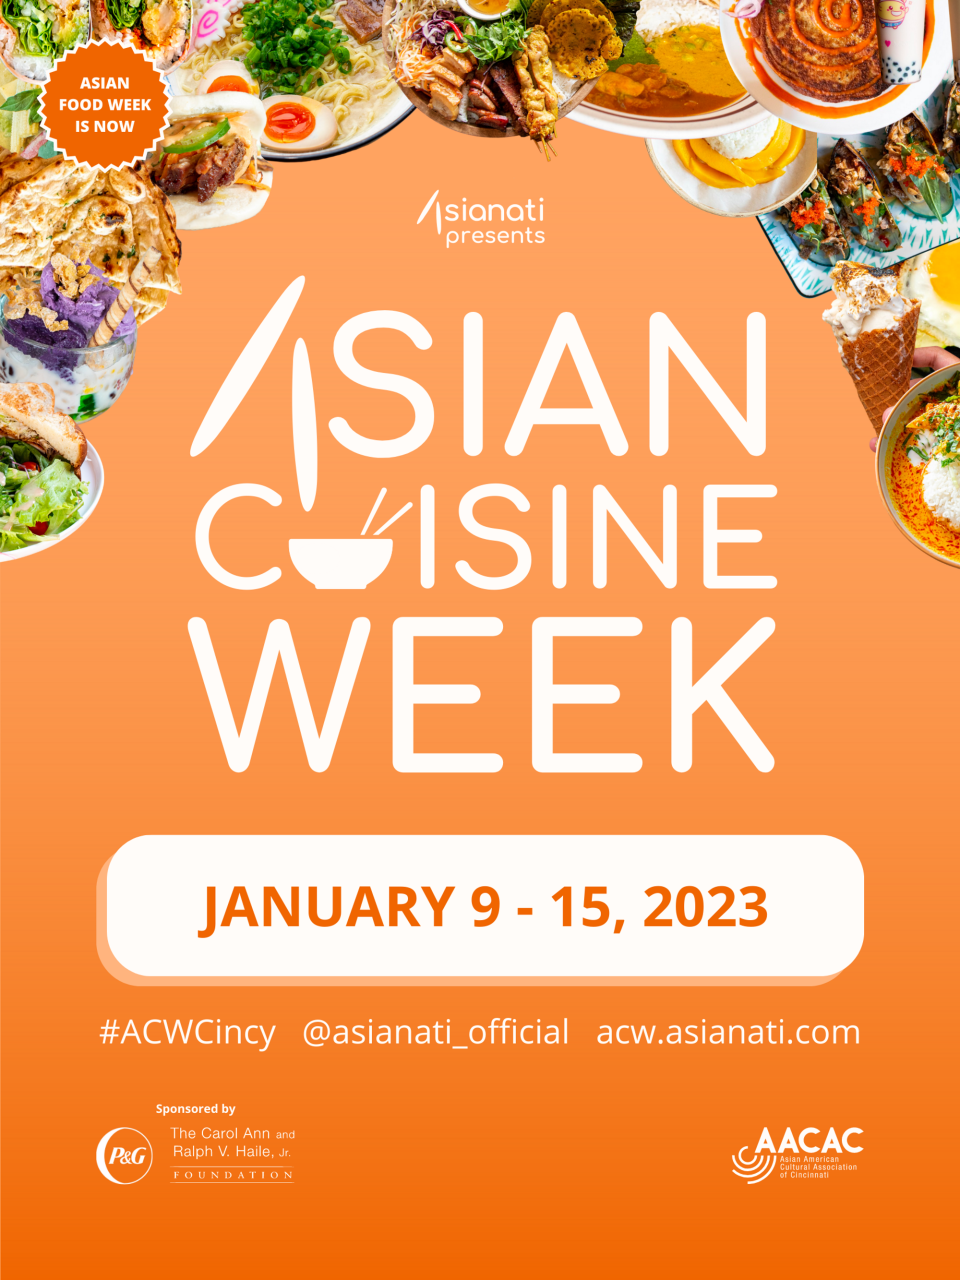 Asian Cuisine Week runs from Jan. 9 through Jan. 15 and includes over 40 participating Asian restaurants in Greater Cincinnati.